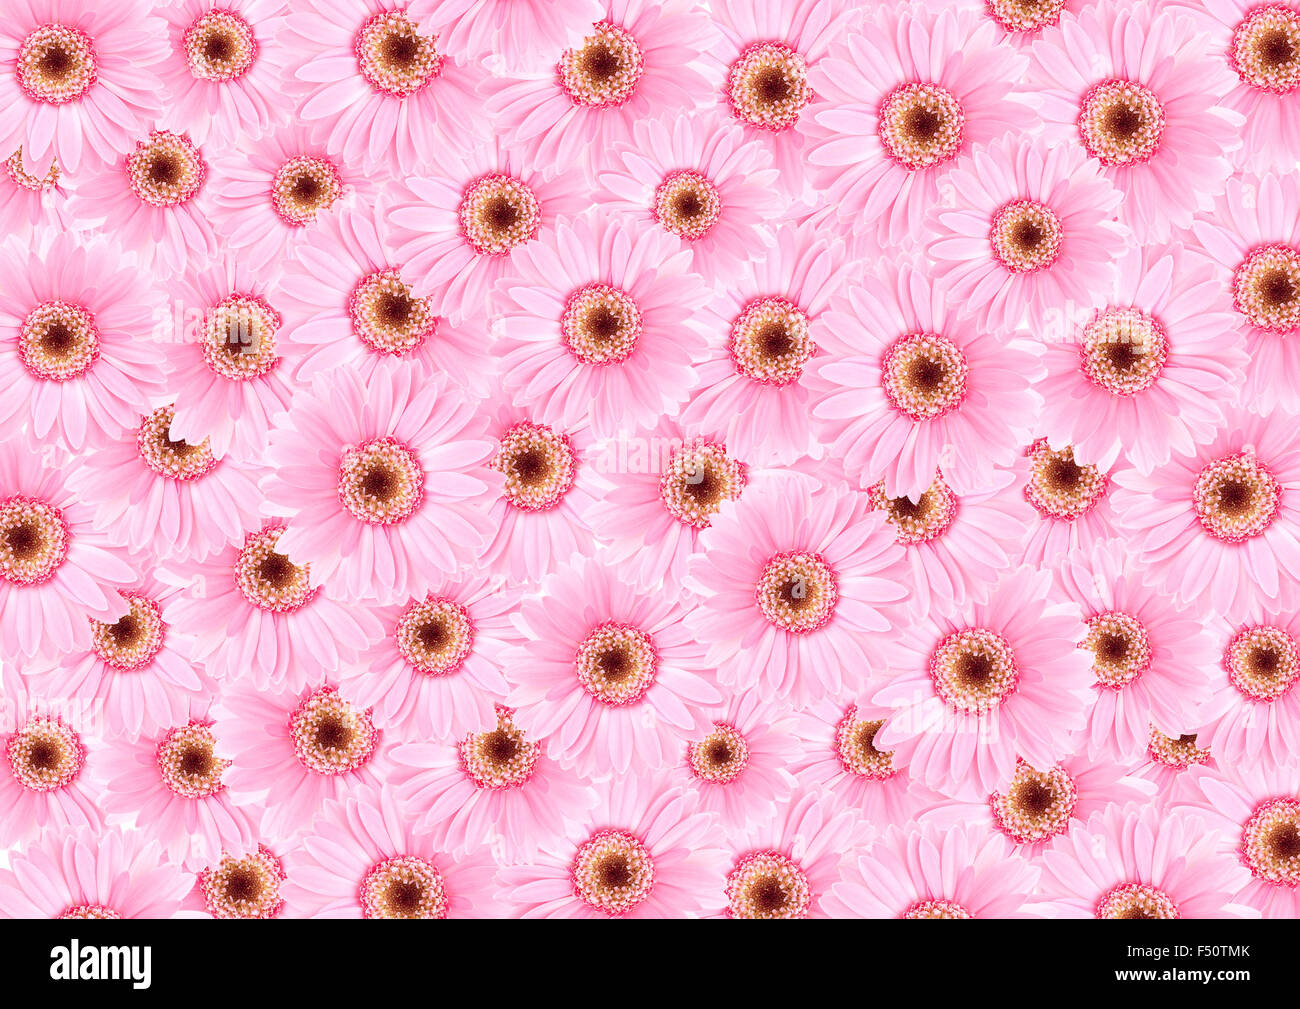 Pink Sunflowers Twitter Background  Pink Sunflowers Theme for Twitter